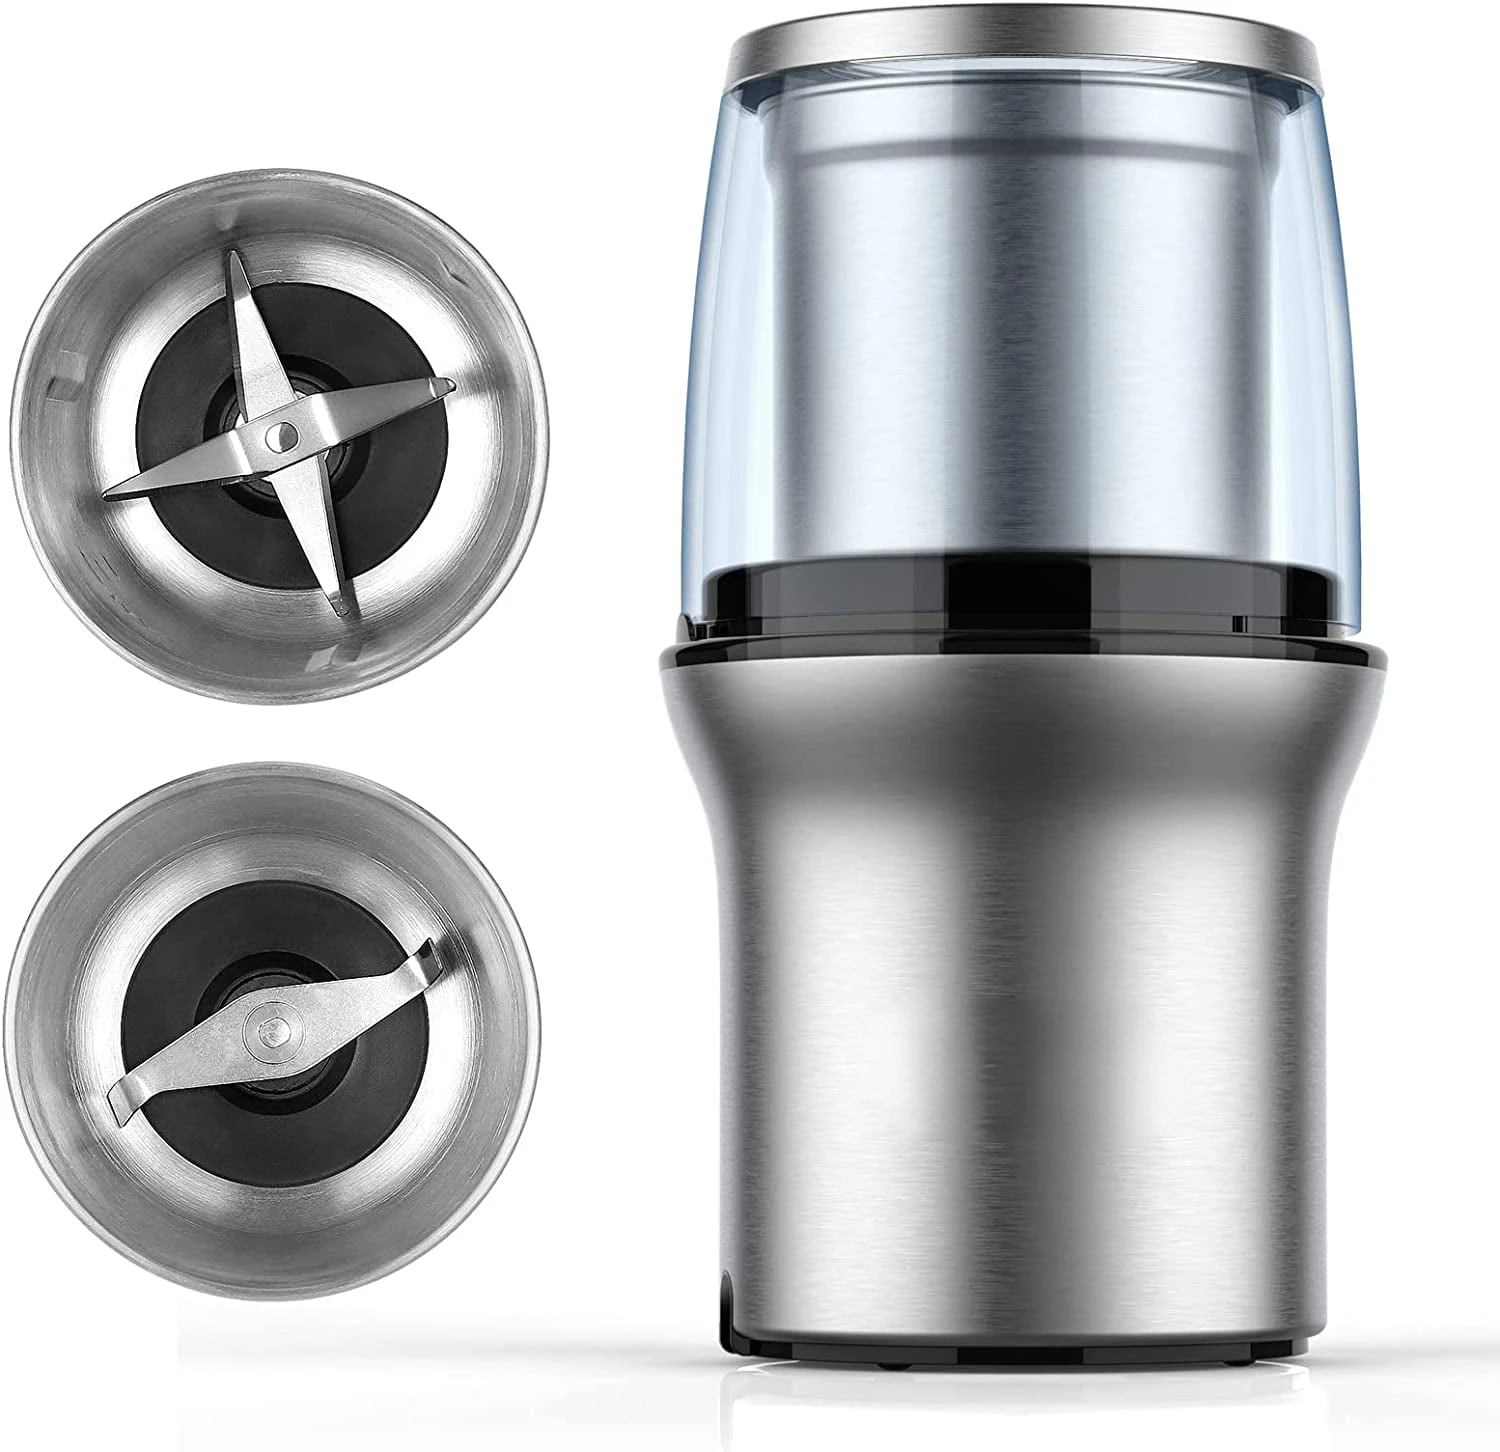 

Electric Coffee Grinder and Spice Grinder with 2 Stainless Steel Blades Removable Bowls